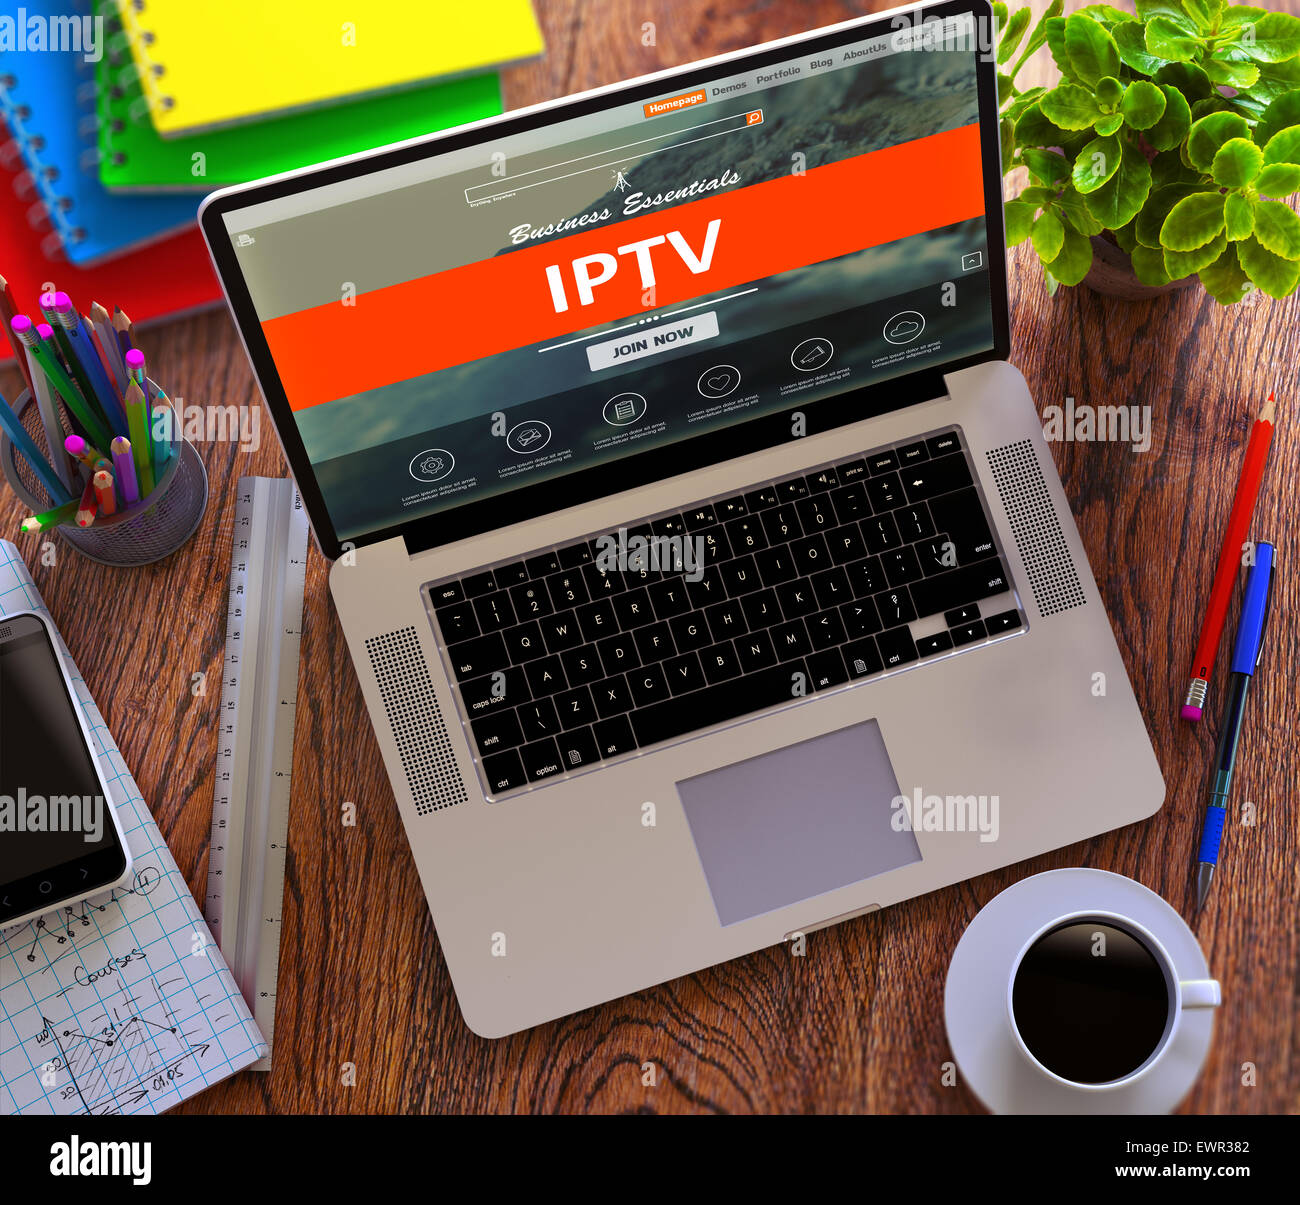 IPTV - Internet Protocol Television - on Laptop Screen. Office Working  Concept Stock Photo - Alamy